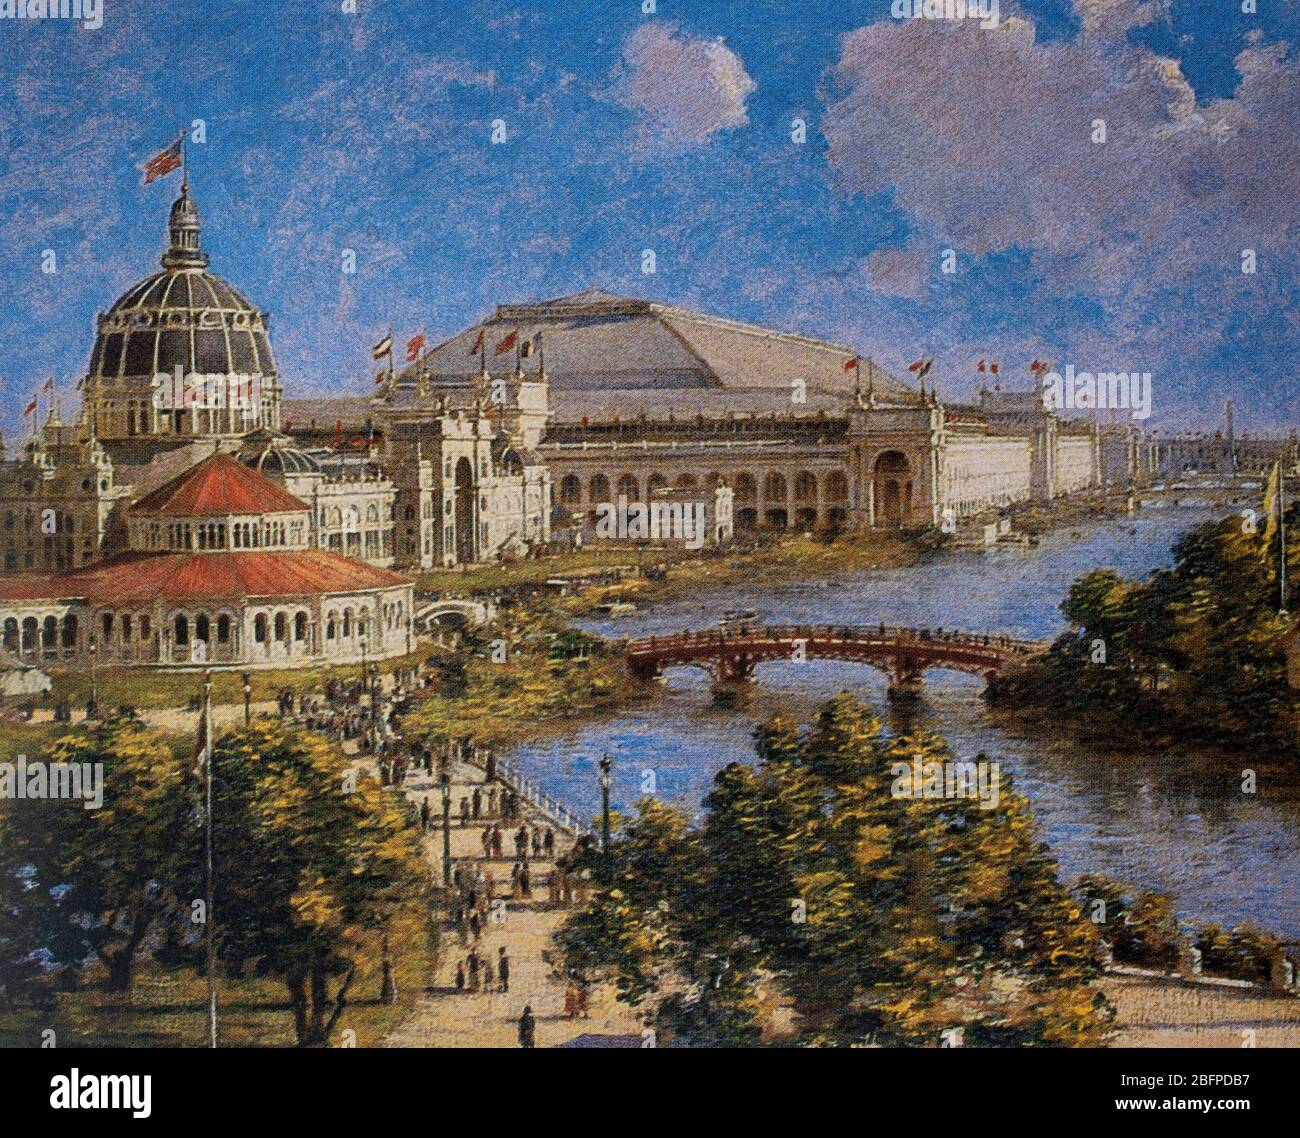 The World's Columbian Exposition aka the Chicago World's Fair and Chicago Columbian Exposition) was a world's fair held in Chicago in 1893 to celebrate the 400th anniversary of Christopher Columbus's arrival in the New World in 1492. Painting by Theodore Robinson (1852-1896), United States of America. Stock Photo